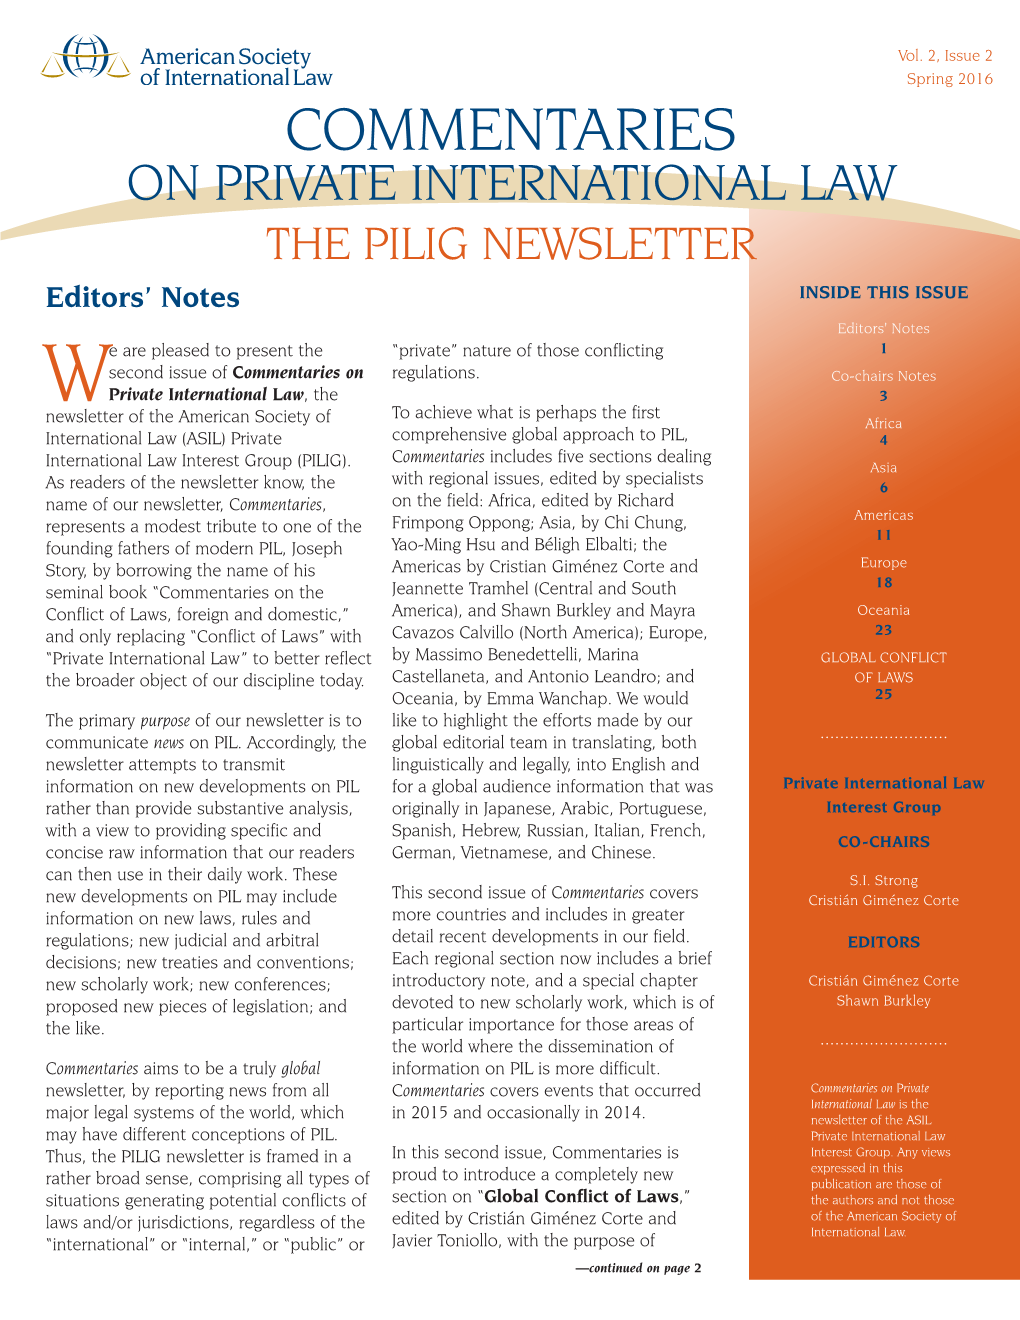 Commentaries on Private International Law, Vol 2, Issue 2, March 2016